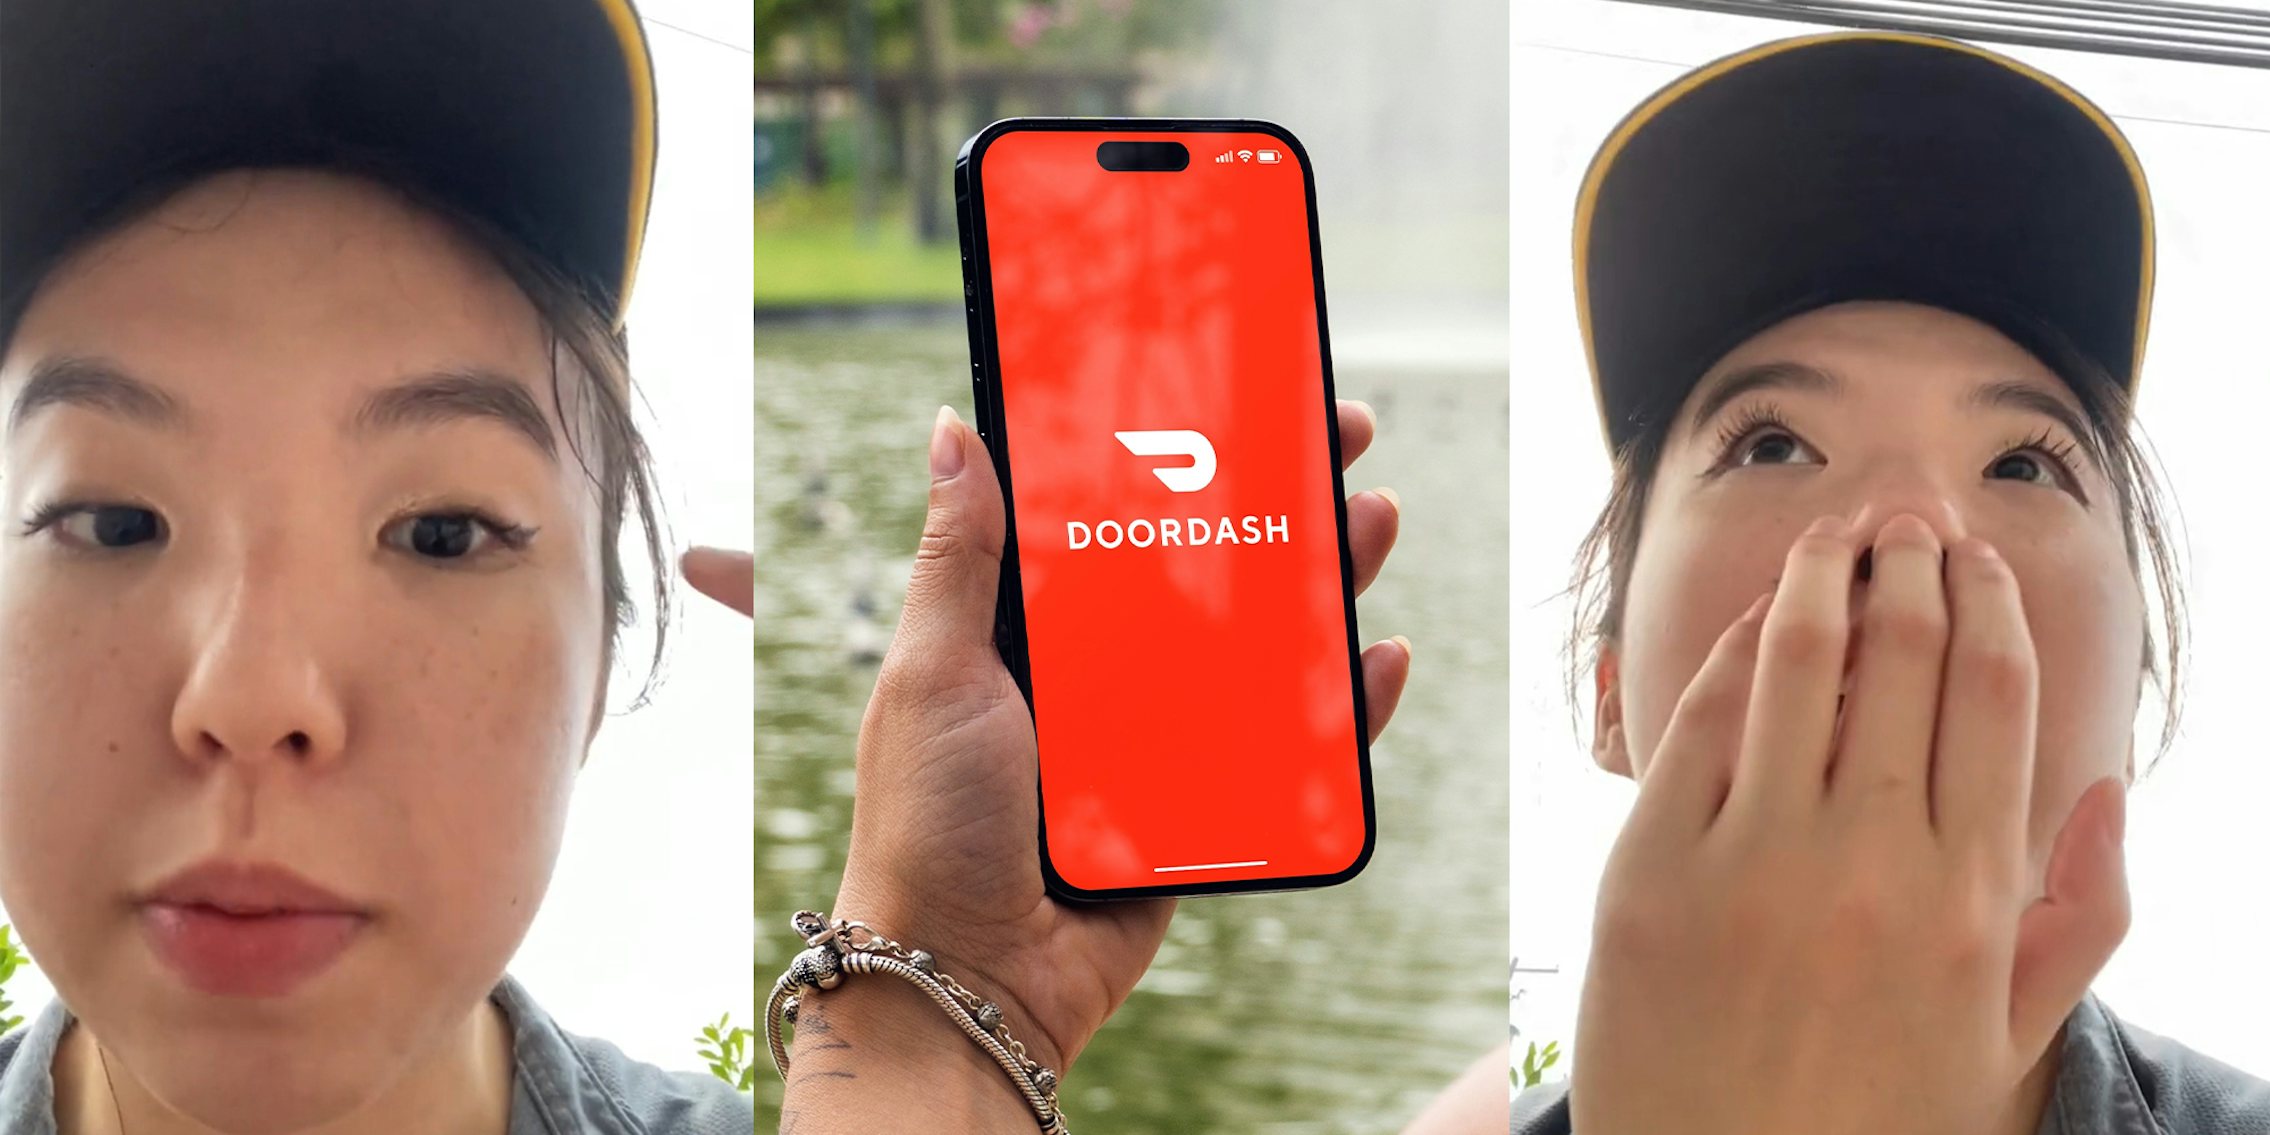 McDonald's worker calls out DoorDash driver who waited 45 minutes for order instead of cancelling it